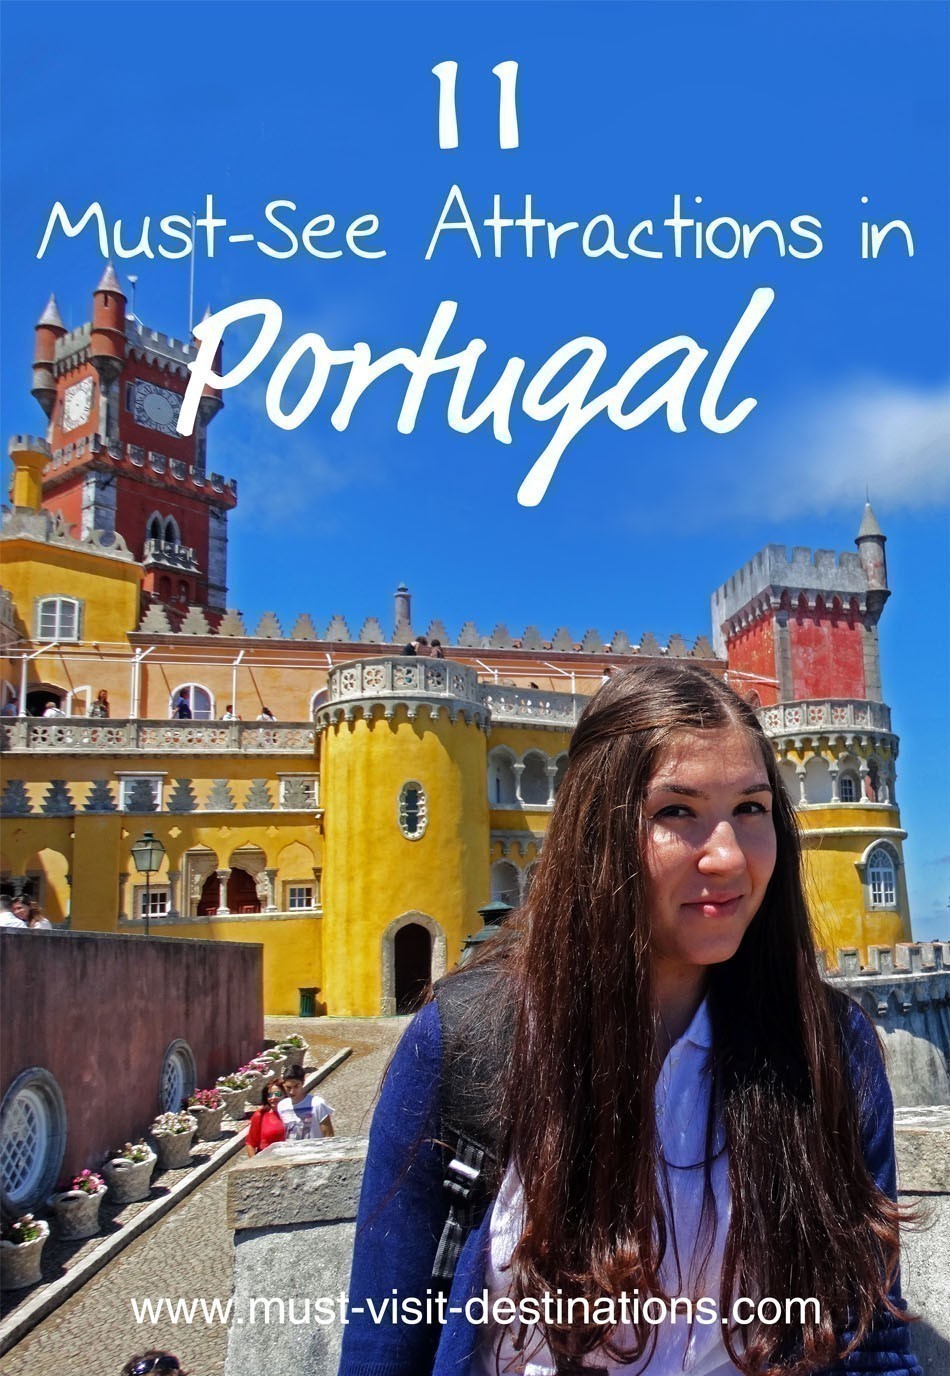 There’s plenty to do and see in Portugal, however, some destinations and sights just cannot be missed. Here are some of the top-rated tourist attractions and best destinations in Portugal.